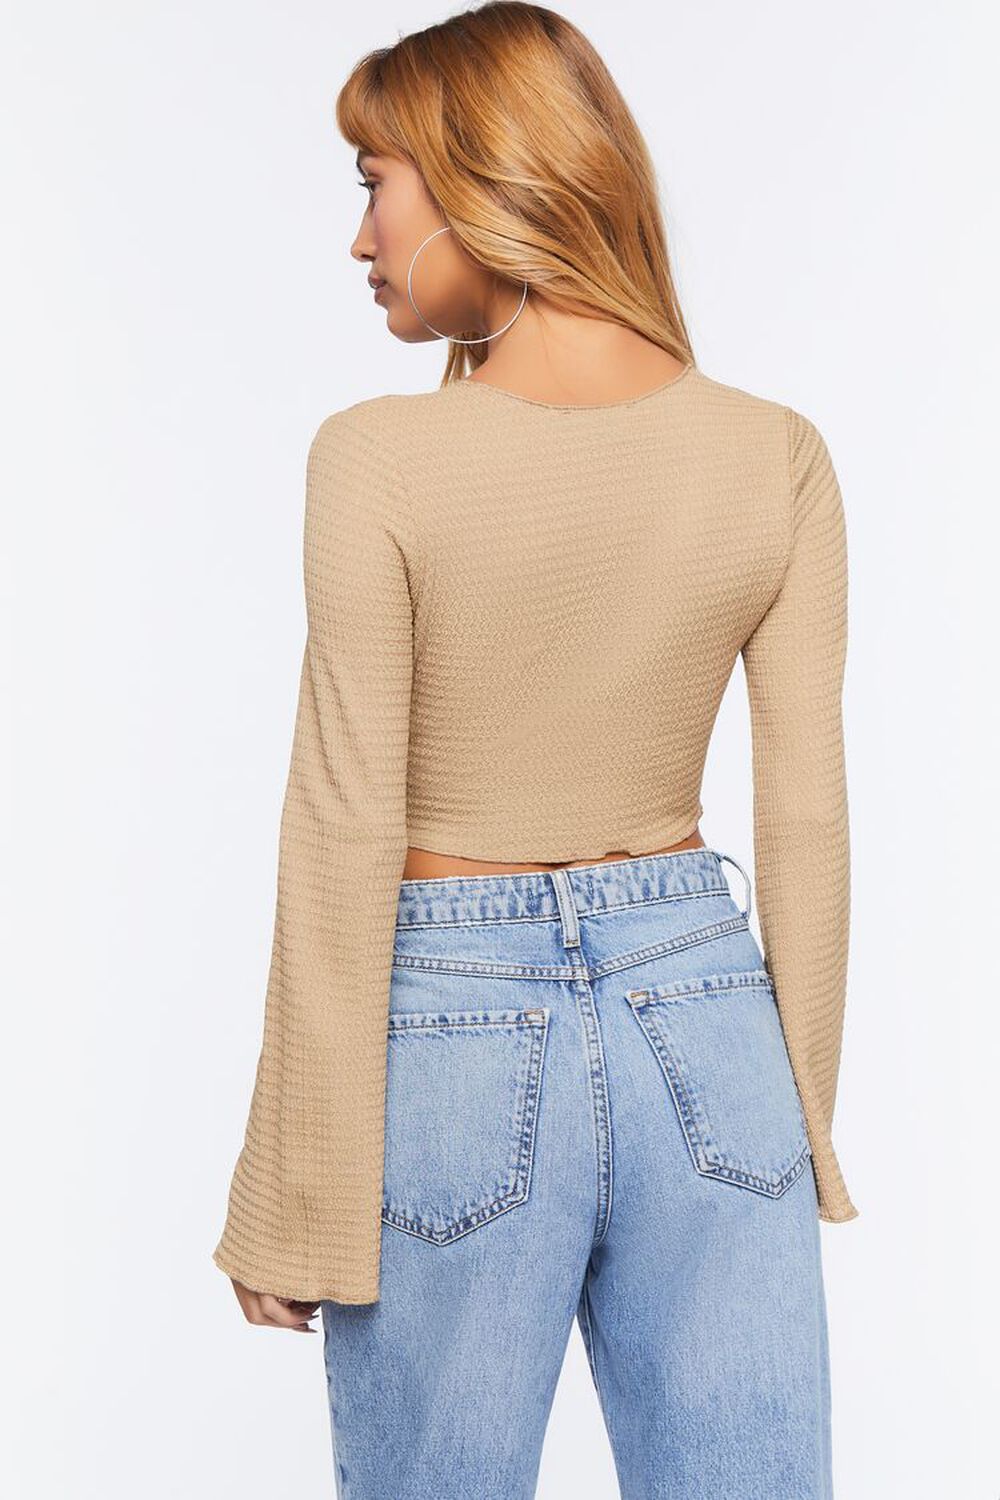 TAUPE Plunging Bell Sleeve Crop Top, image 3